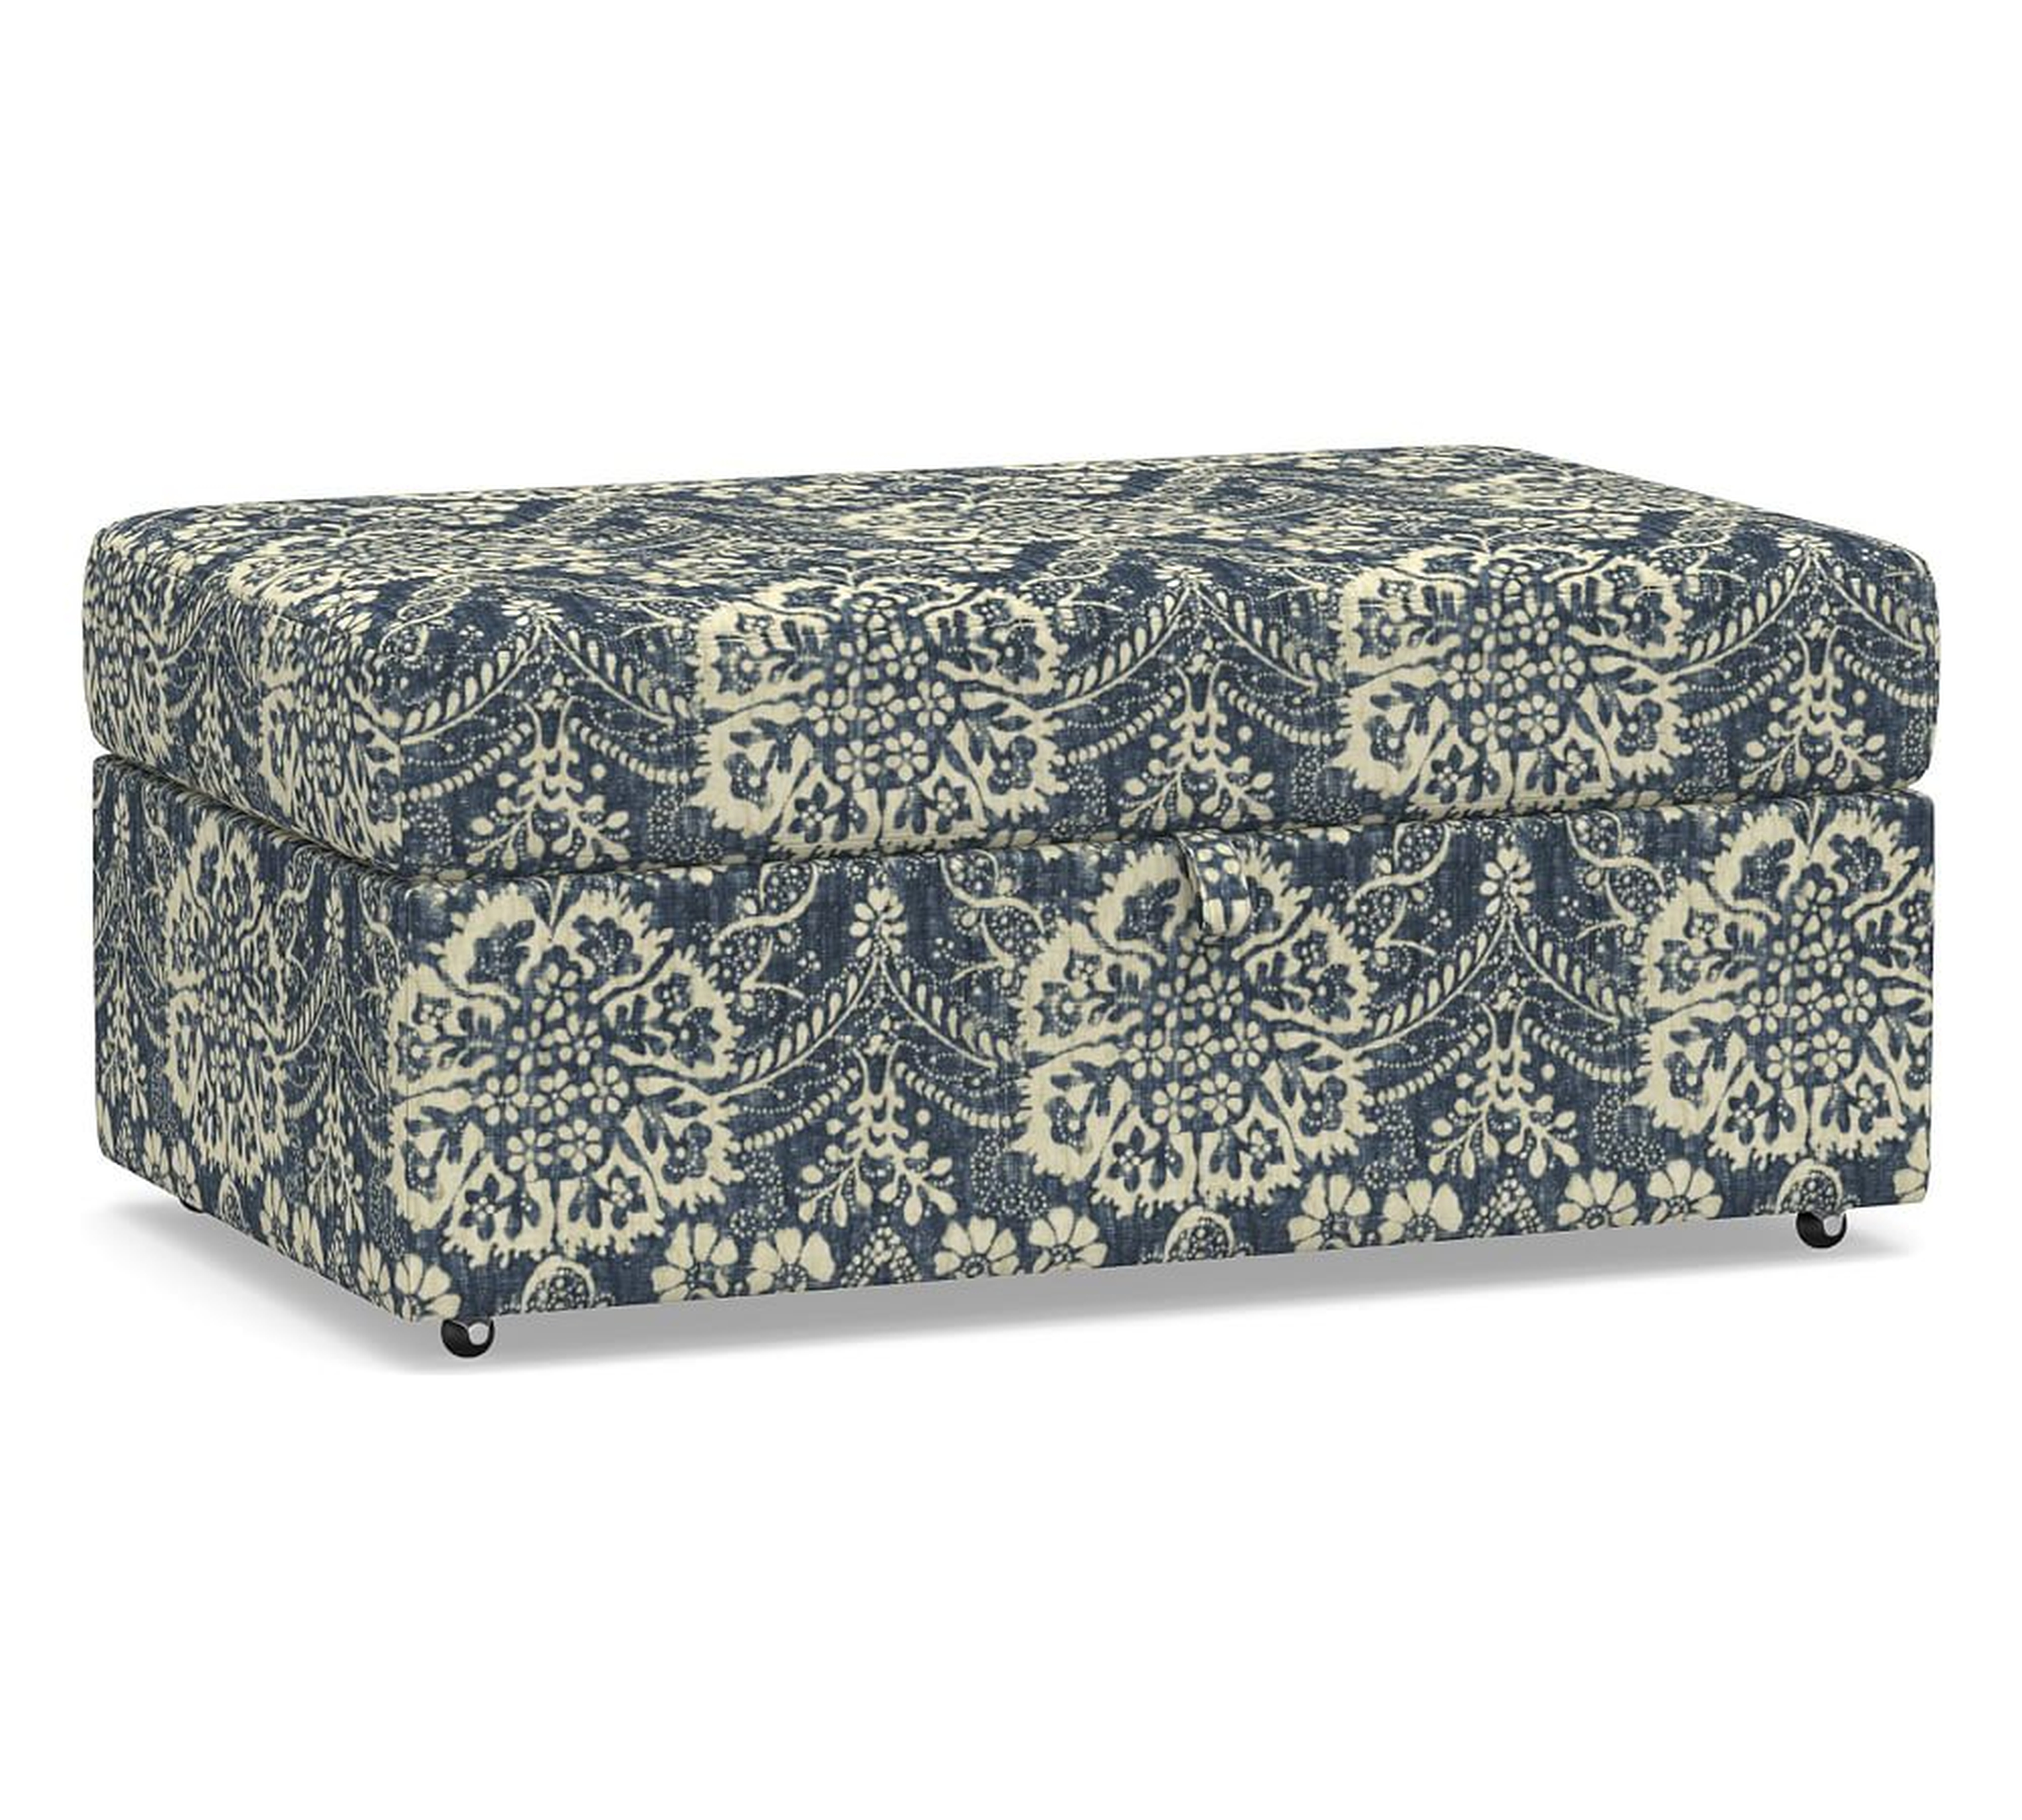 Big Sur Upholstered Storage Ottoman with Pull Out Table, Down Blend Wrapped Cushions, Bernyce Print Blue - Pottery Barn